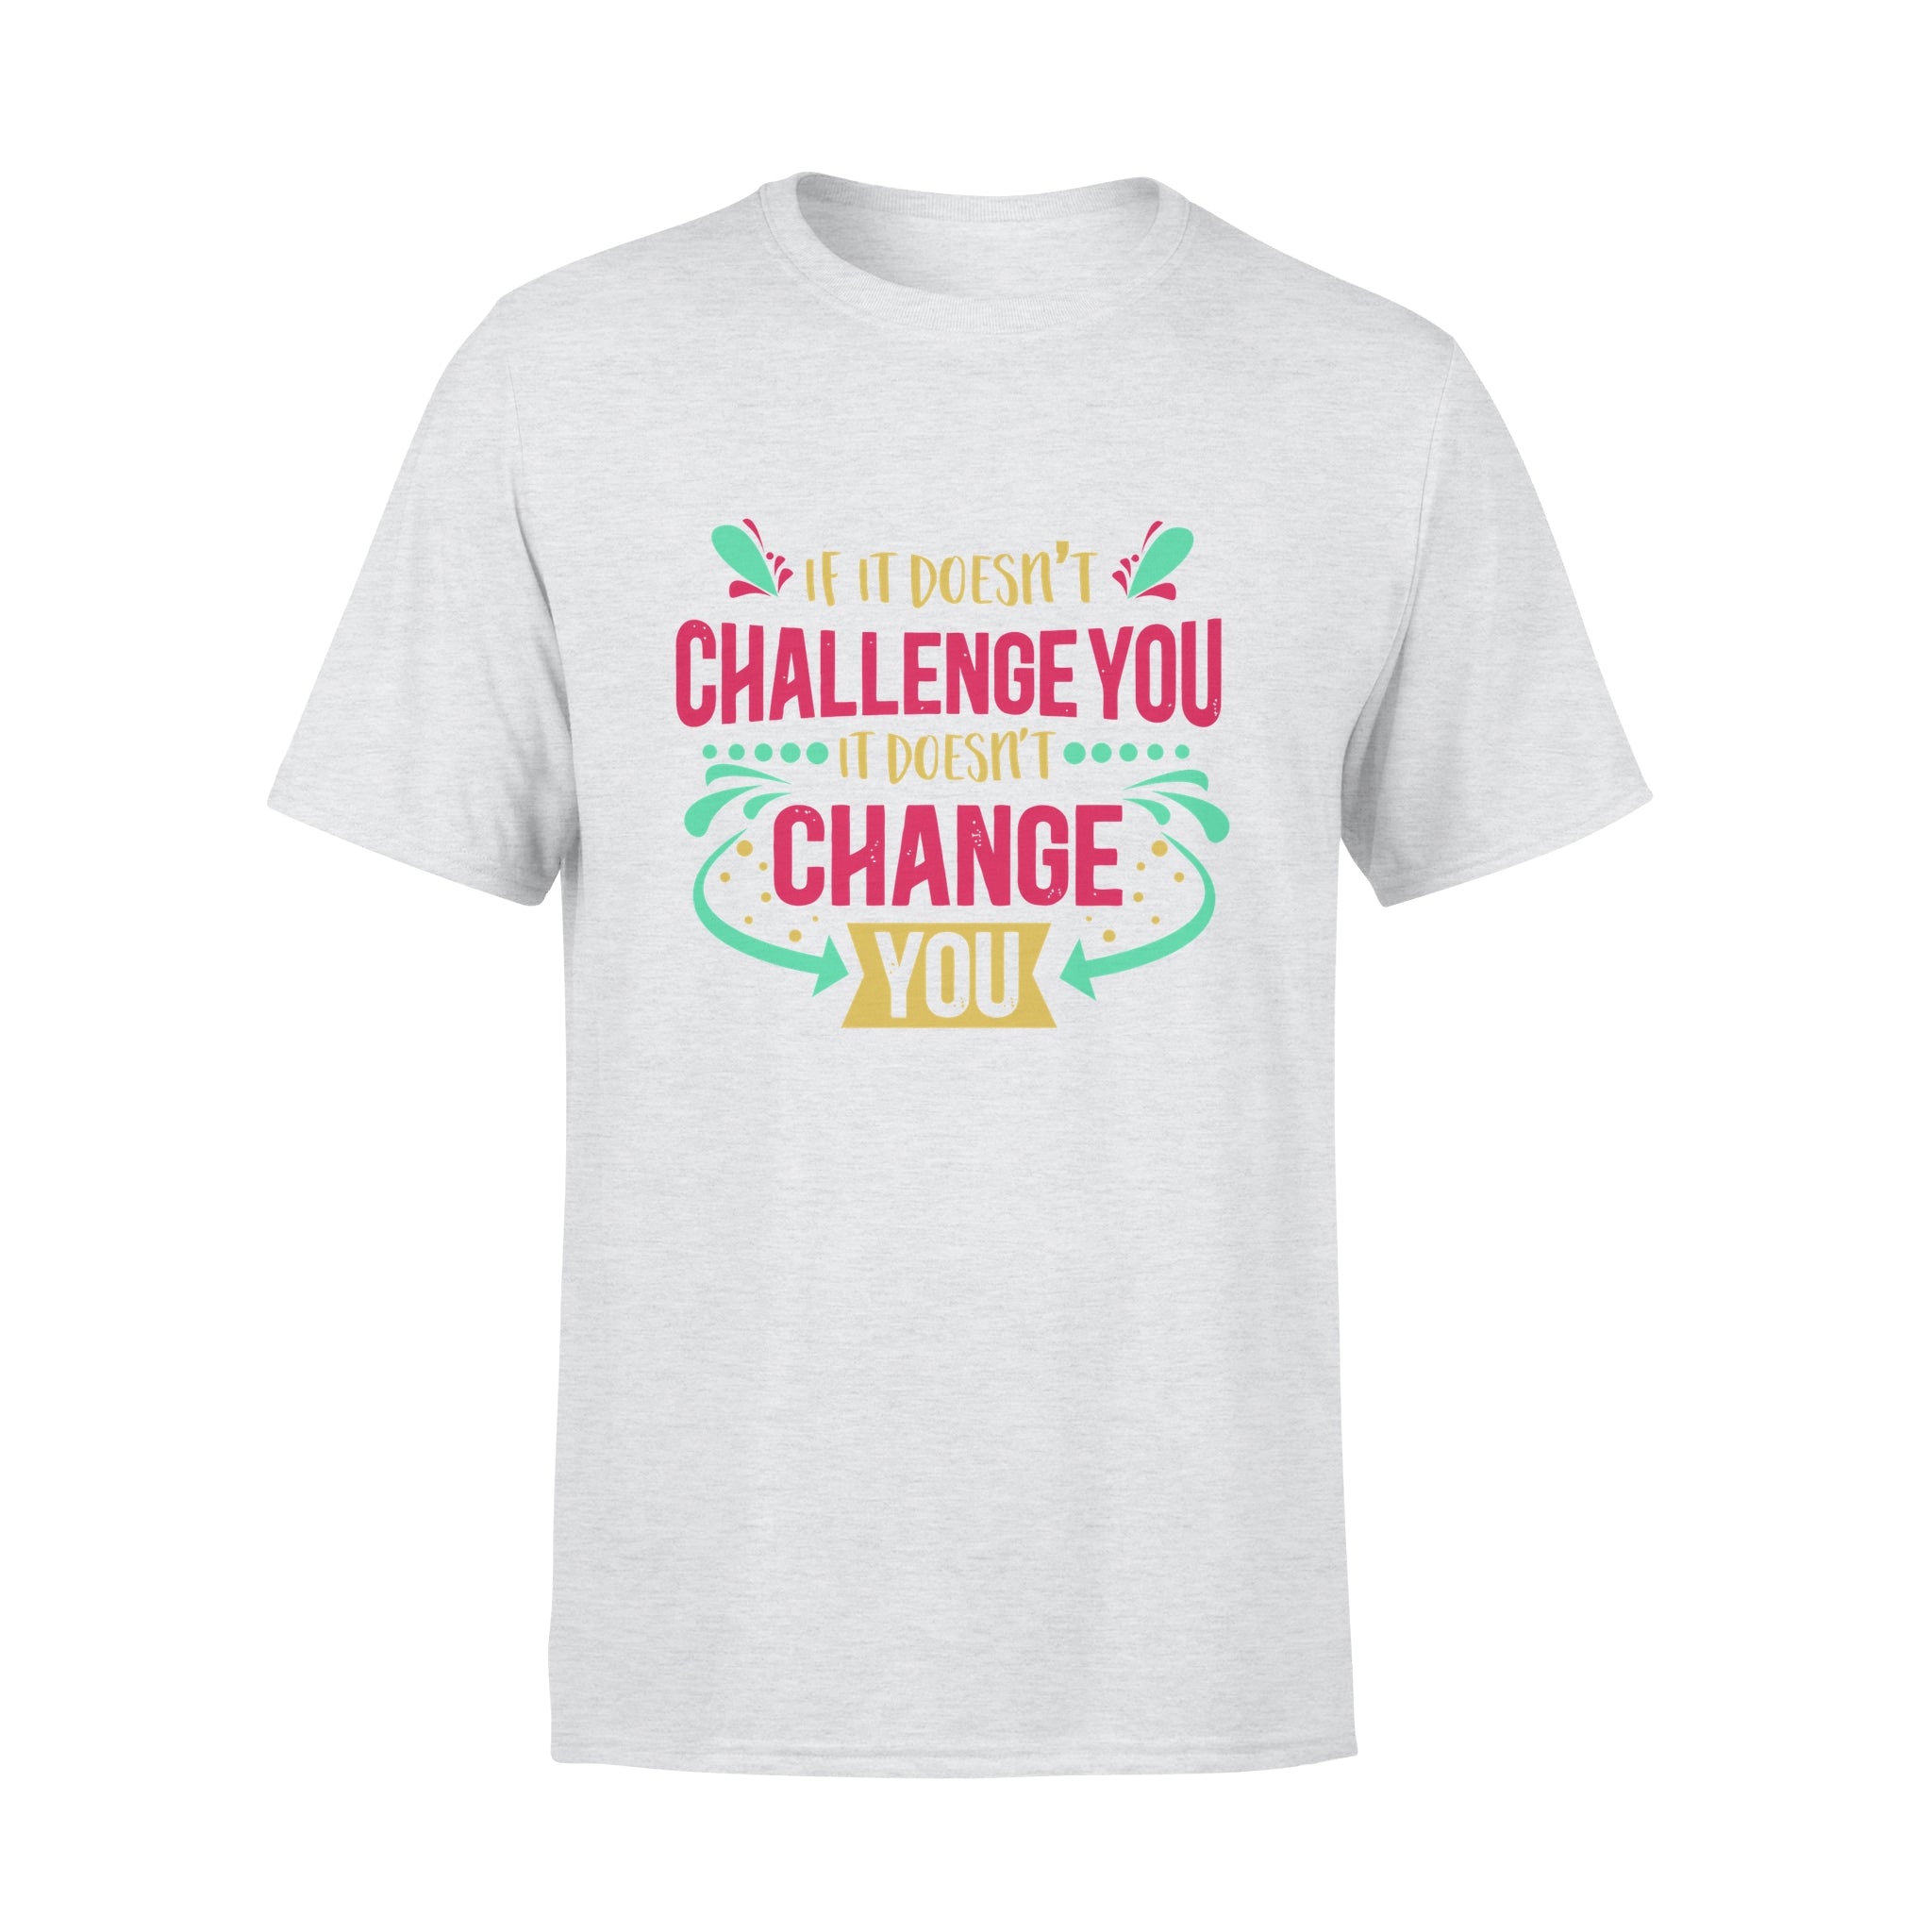 If It Doesn't Challenge You It Doesn't Change You -  T-shirt